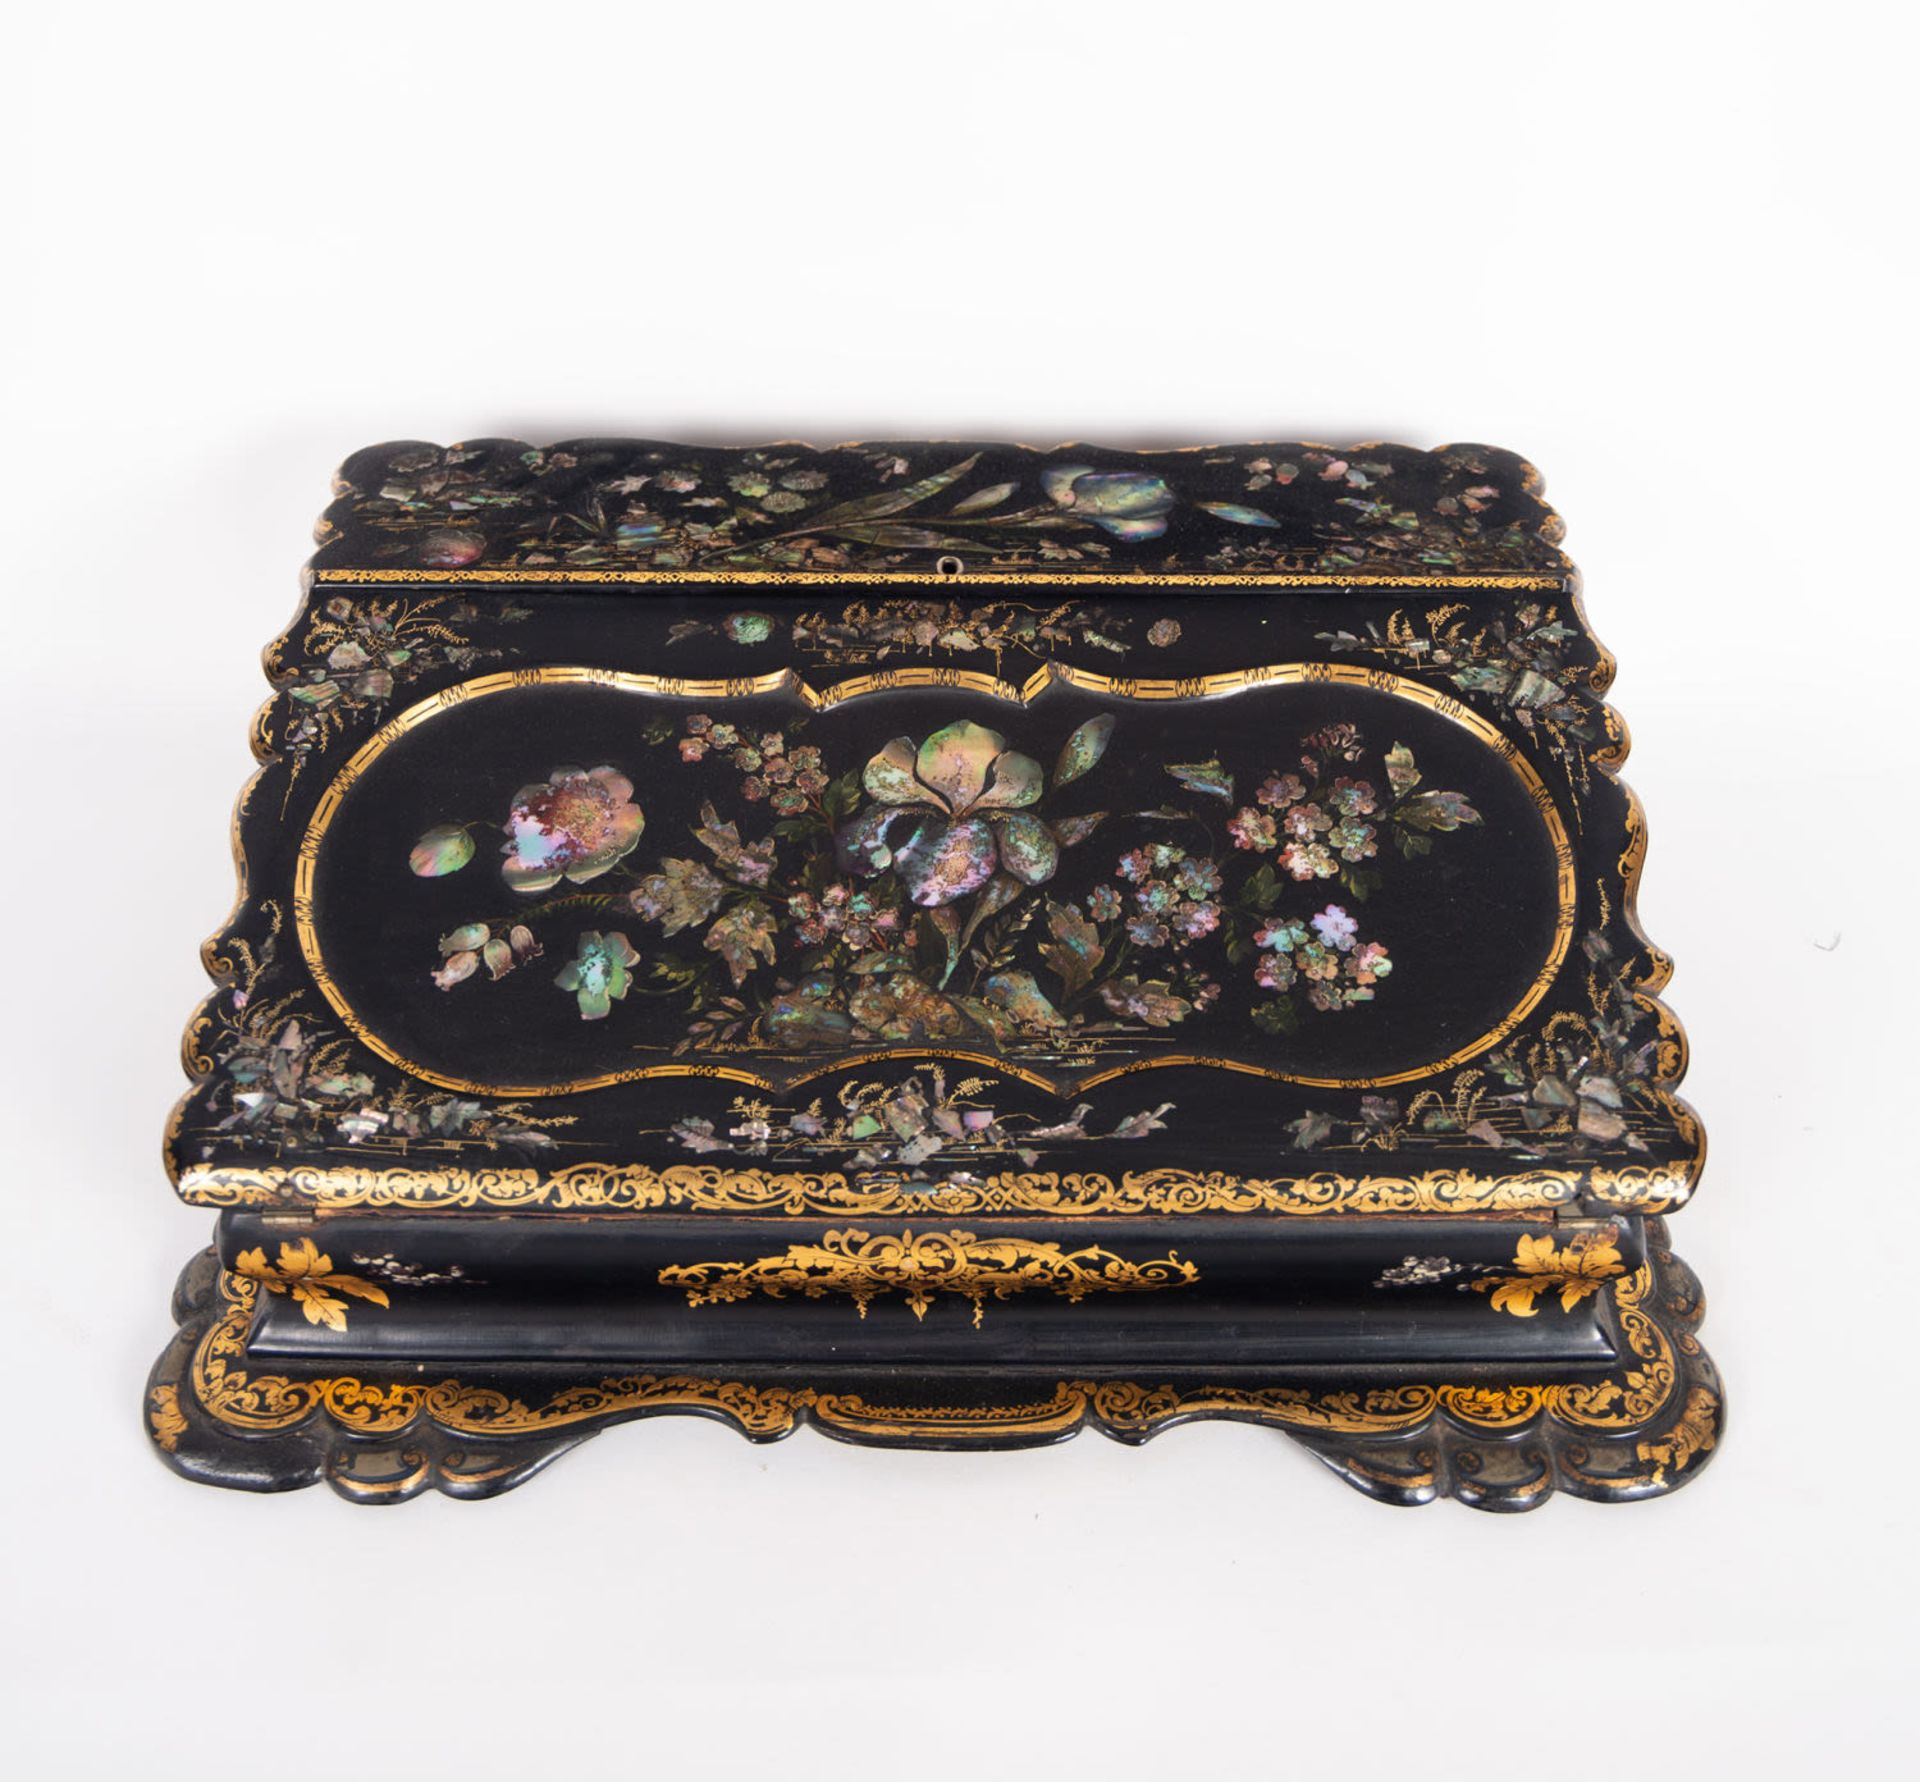 Beautiful writing desk in gilded wood with mother-of-pearl inlays, French school of the 19th century - Image 13 of 13